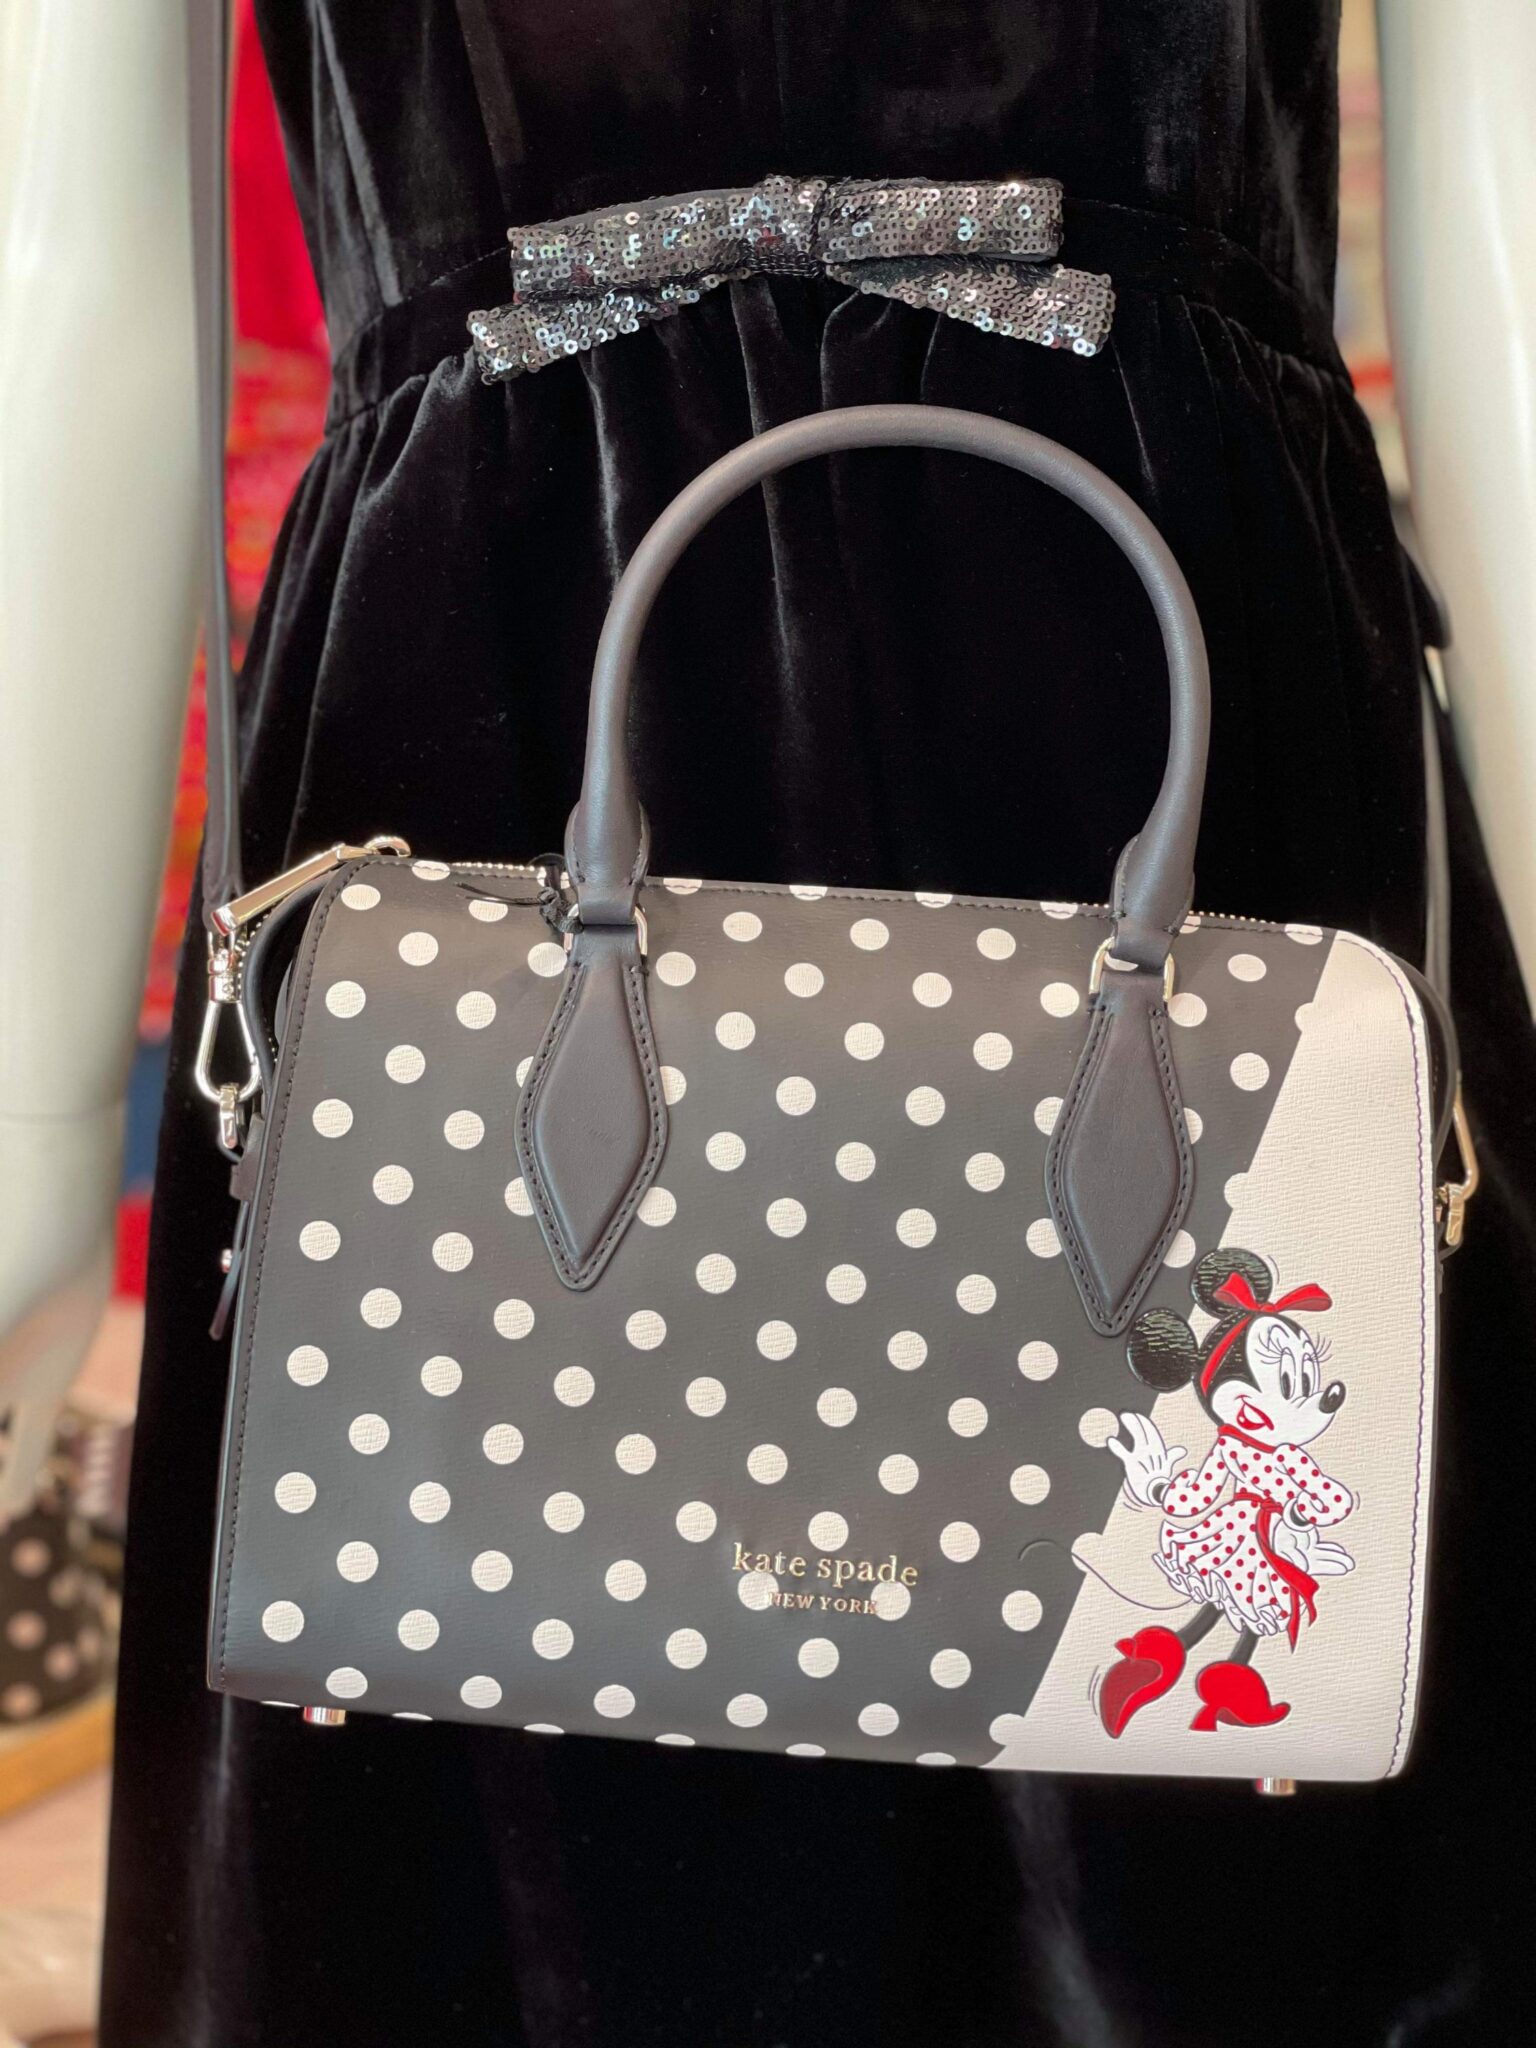 Stay Stylish With The Newest Minnie Mouse x Kate Spade Collection ...